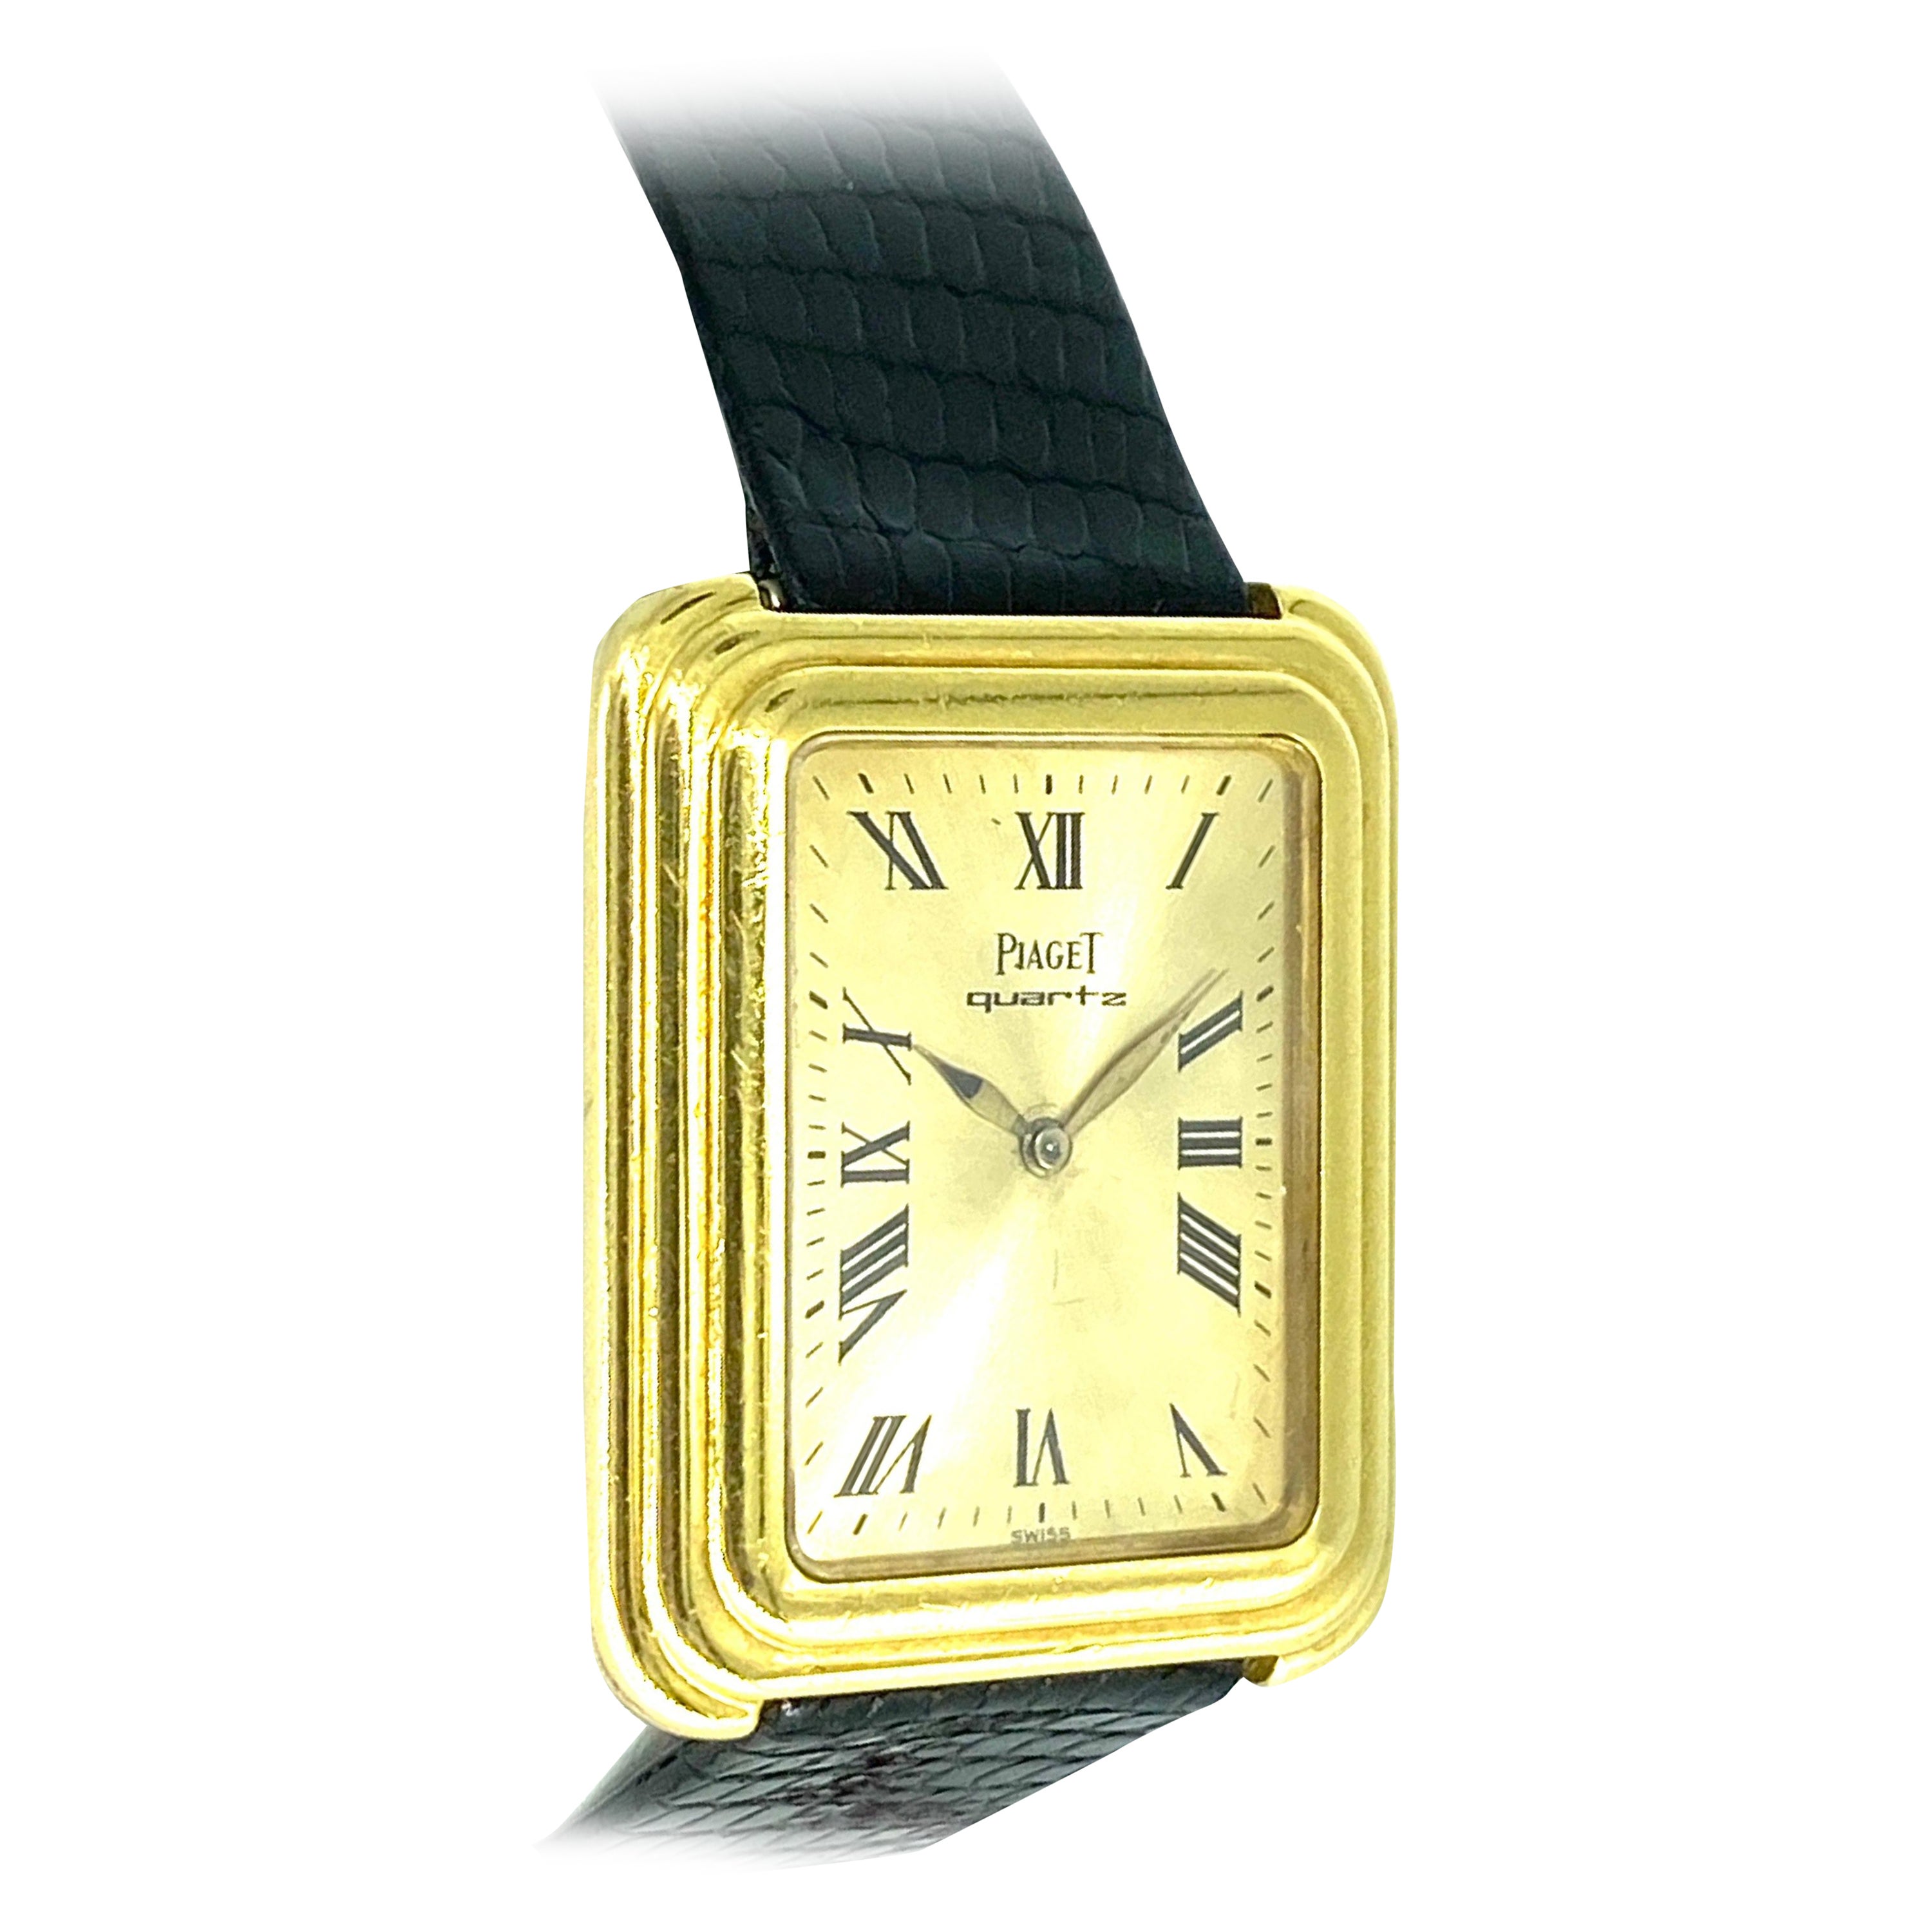 Piaget Stepped Case 18k Solid Gold Watch circa 1980’s For Sale